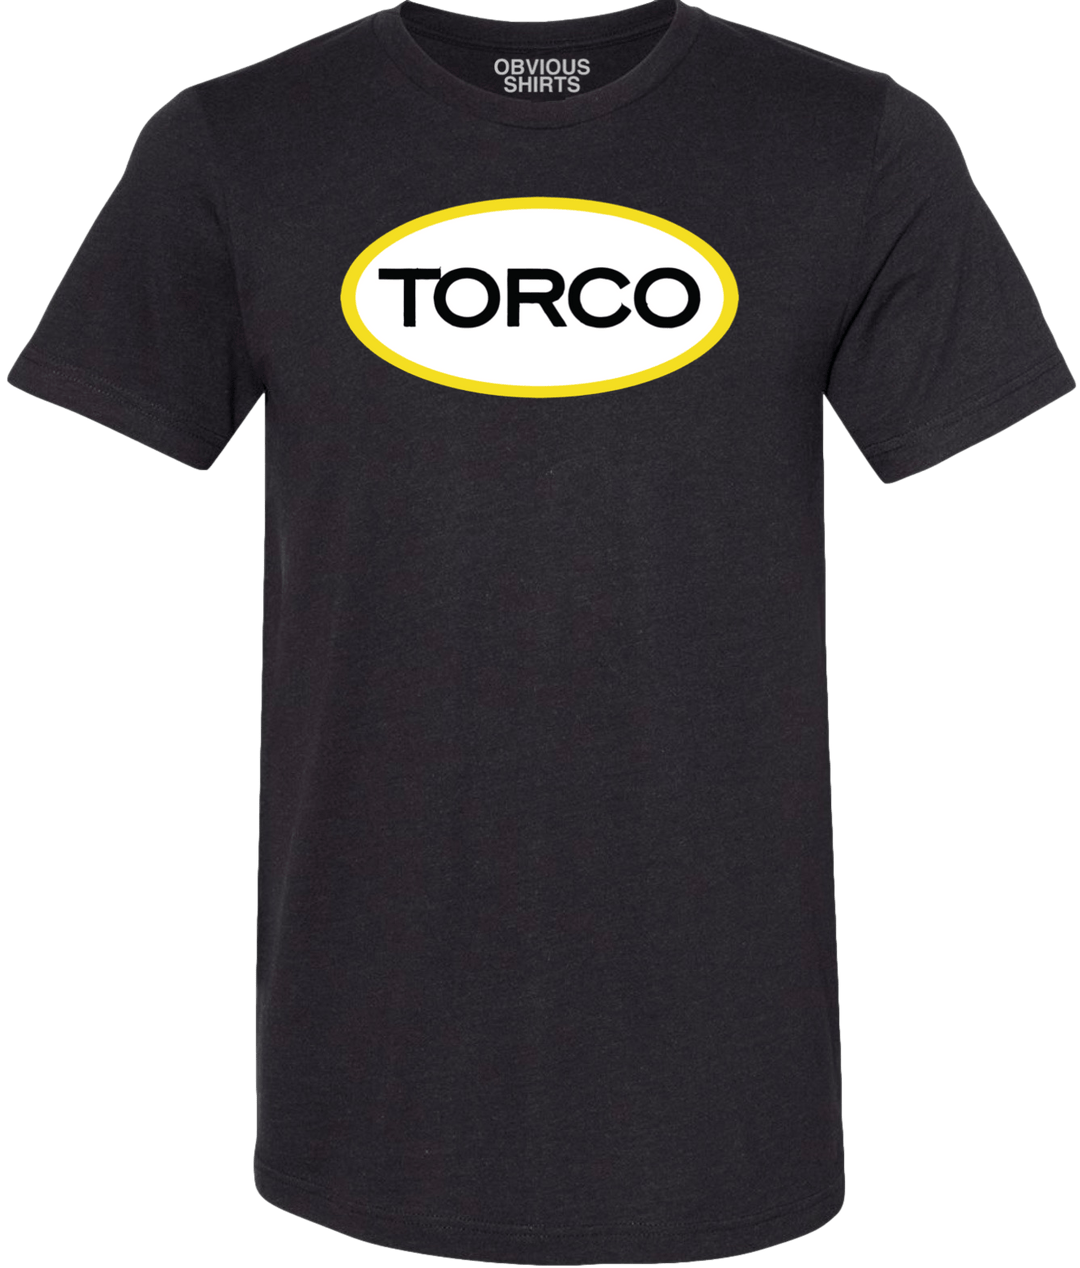 THE TORCO SIGN. - OBVIOUS SHIRTS